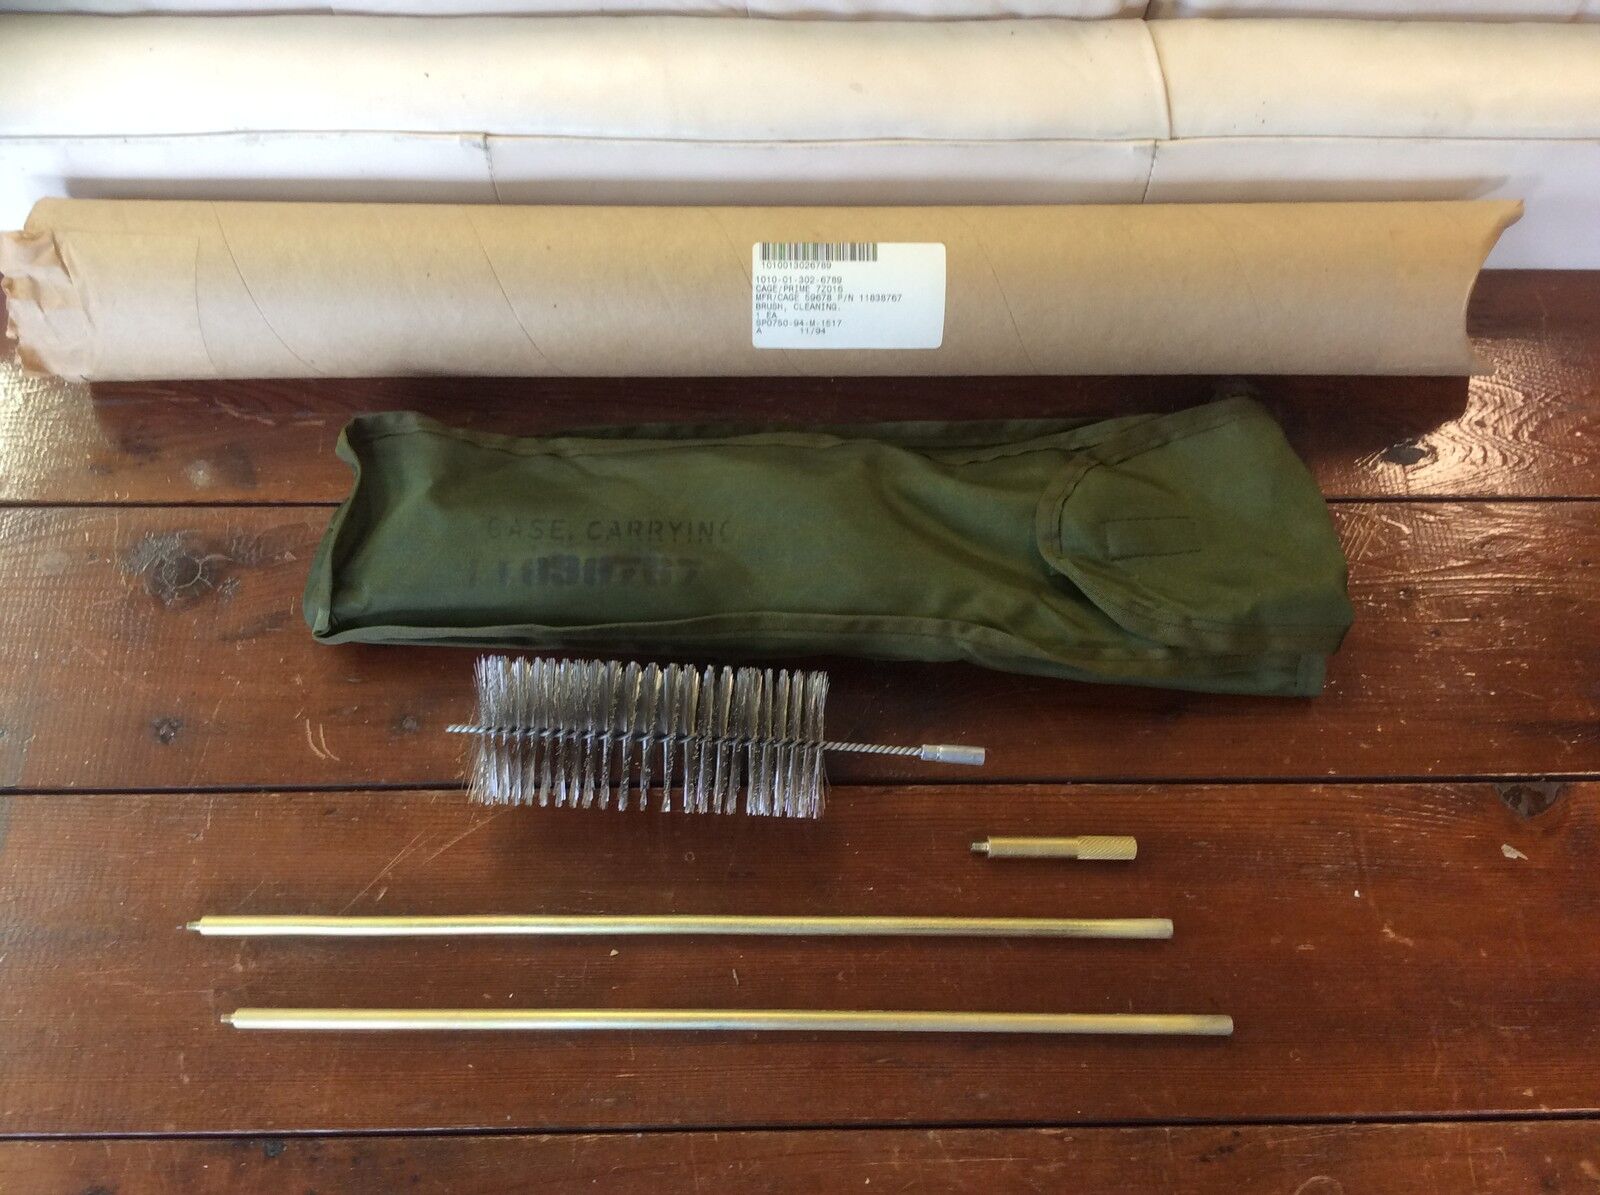 NOS military surplus bore artillary cleaning brush (10)5 piece kits 30mm-75mm